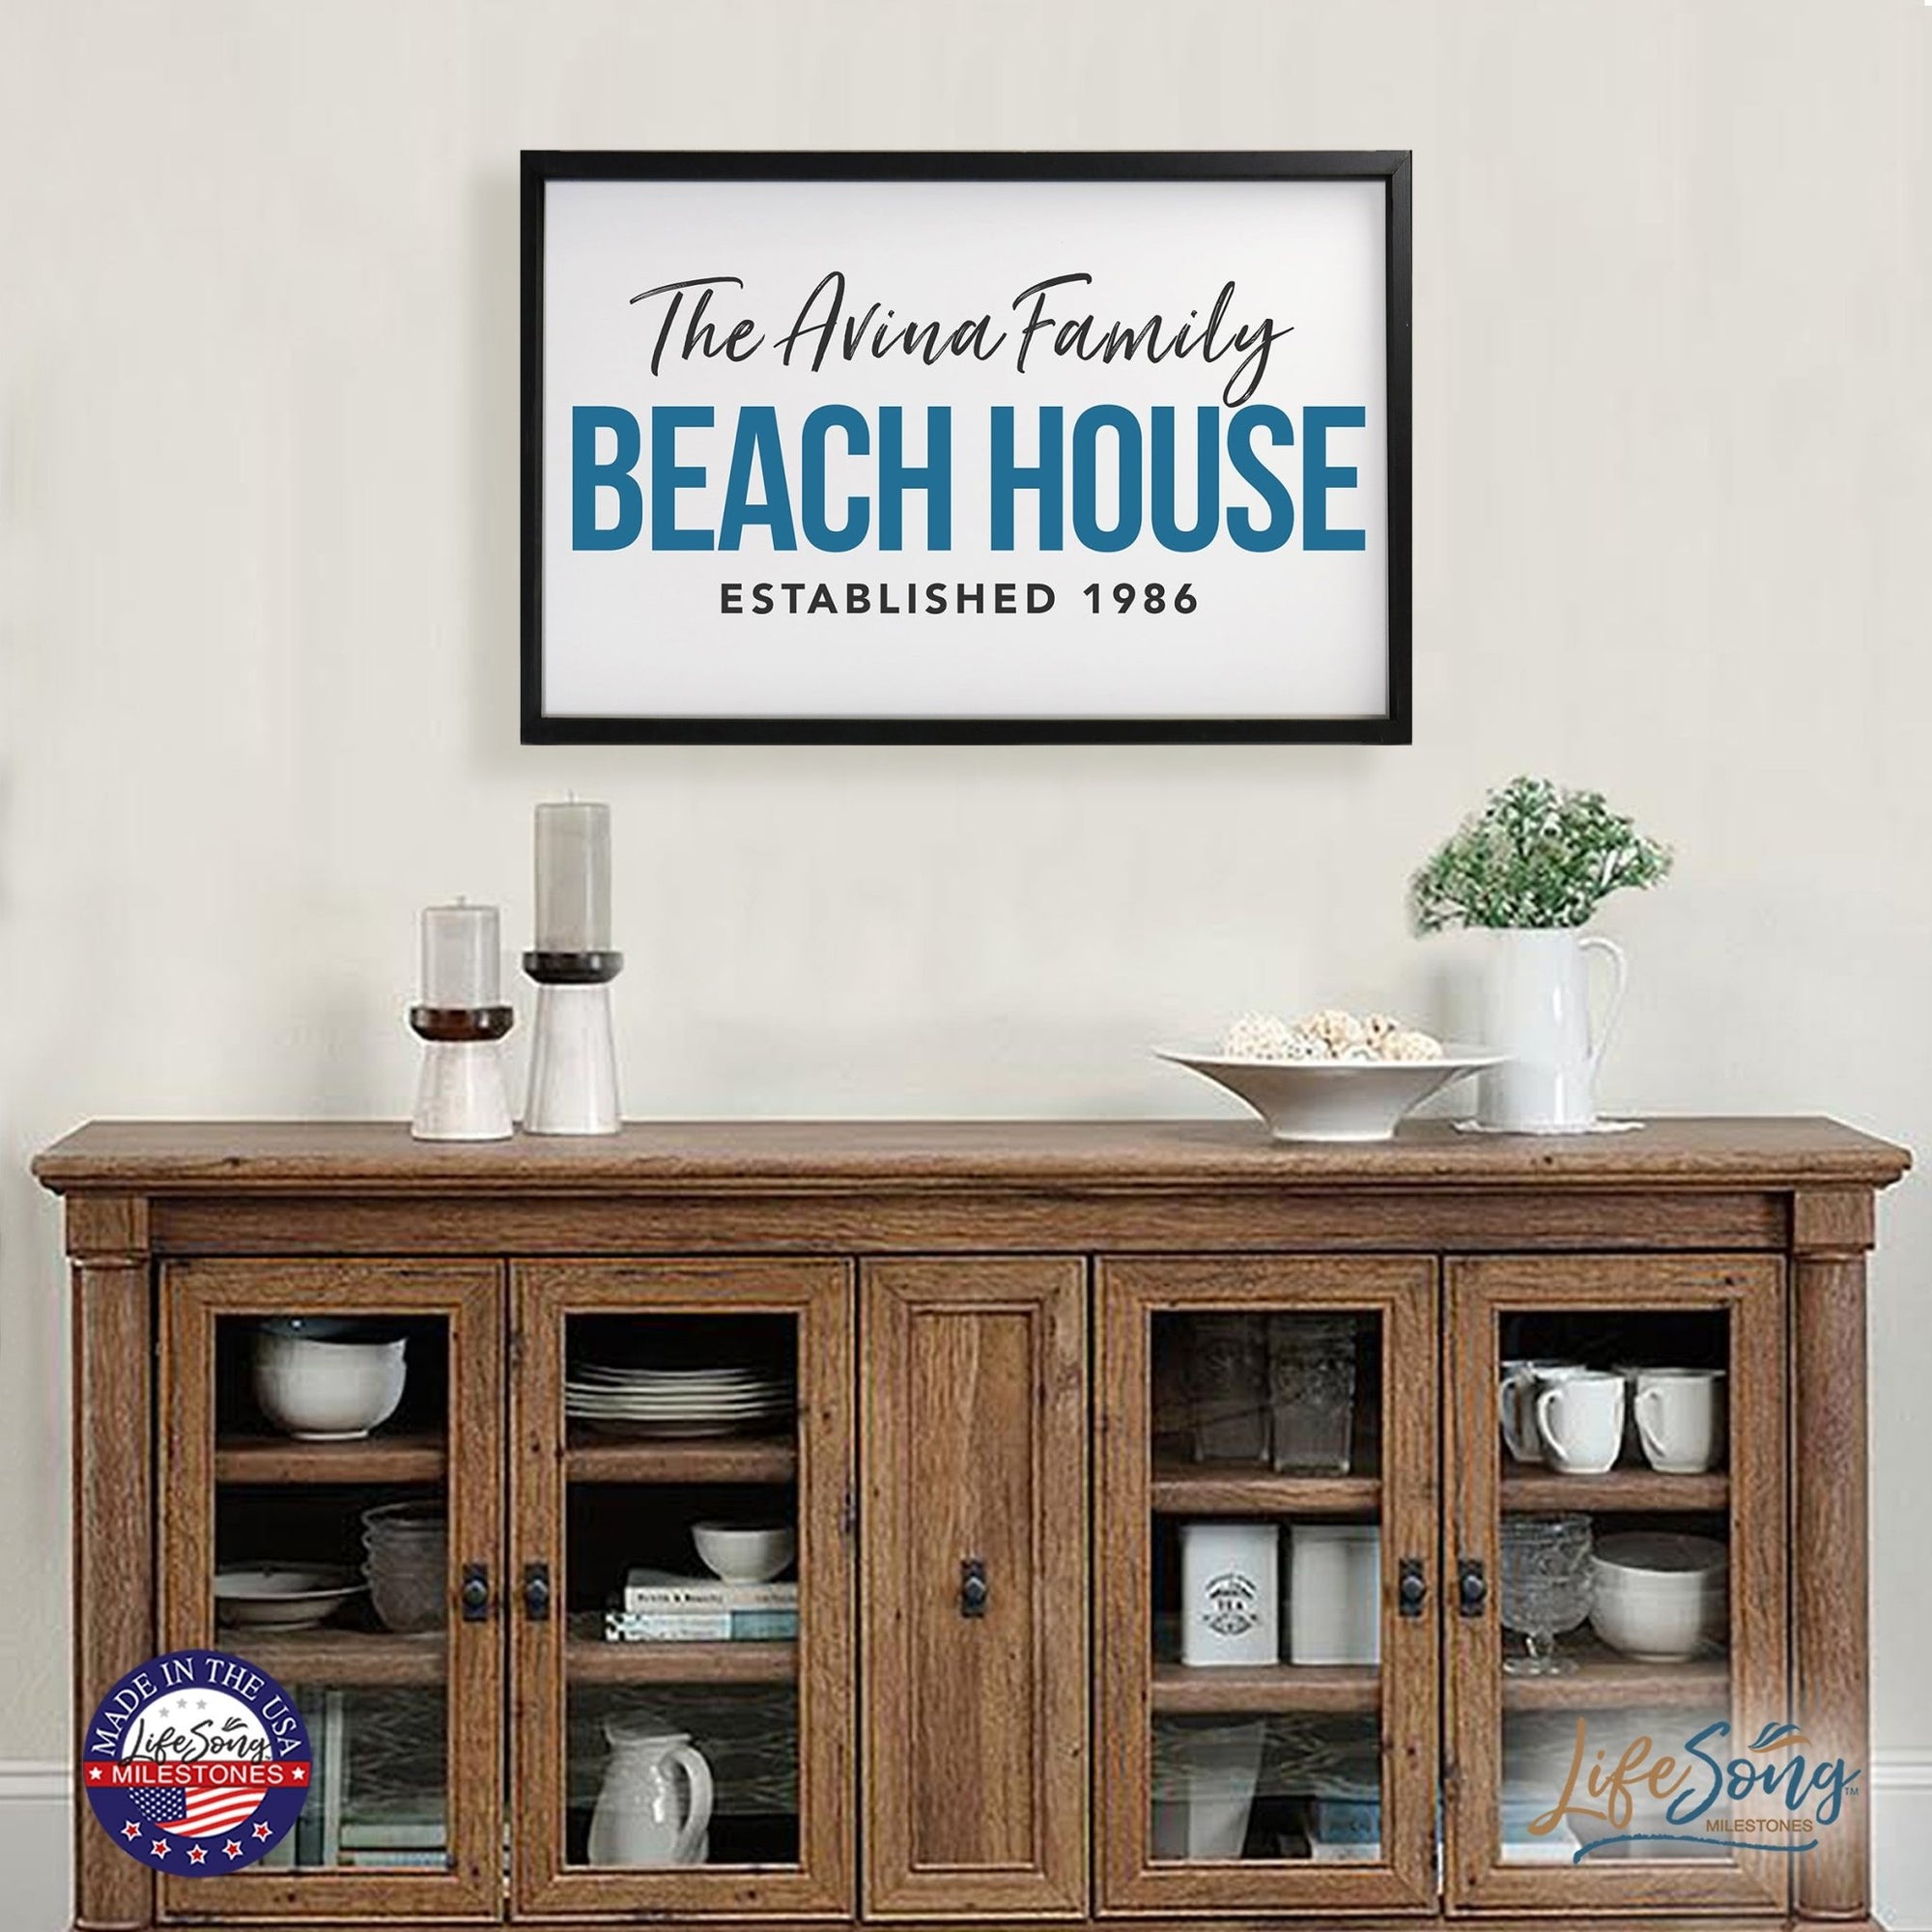 Inspirational Personalized Framed Shadow Box 25x36 - Beach House - LifeSong Milestones